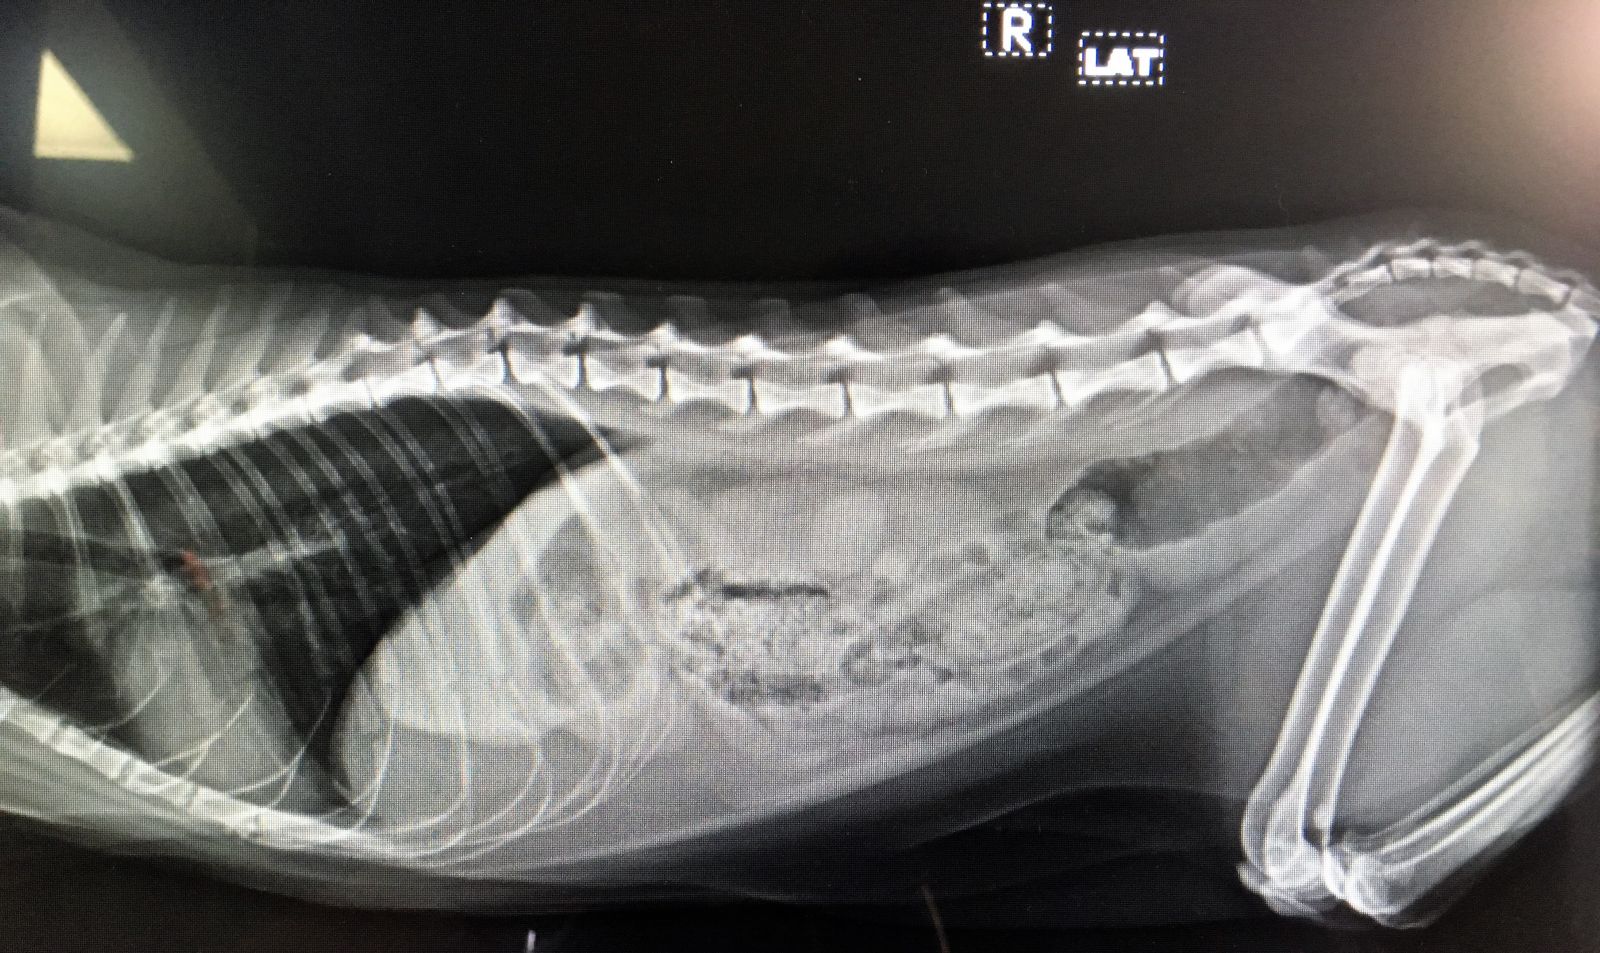 radiograph of cat